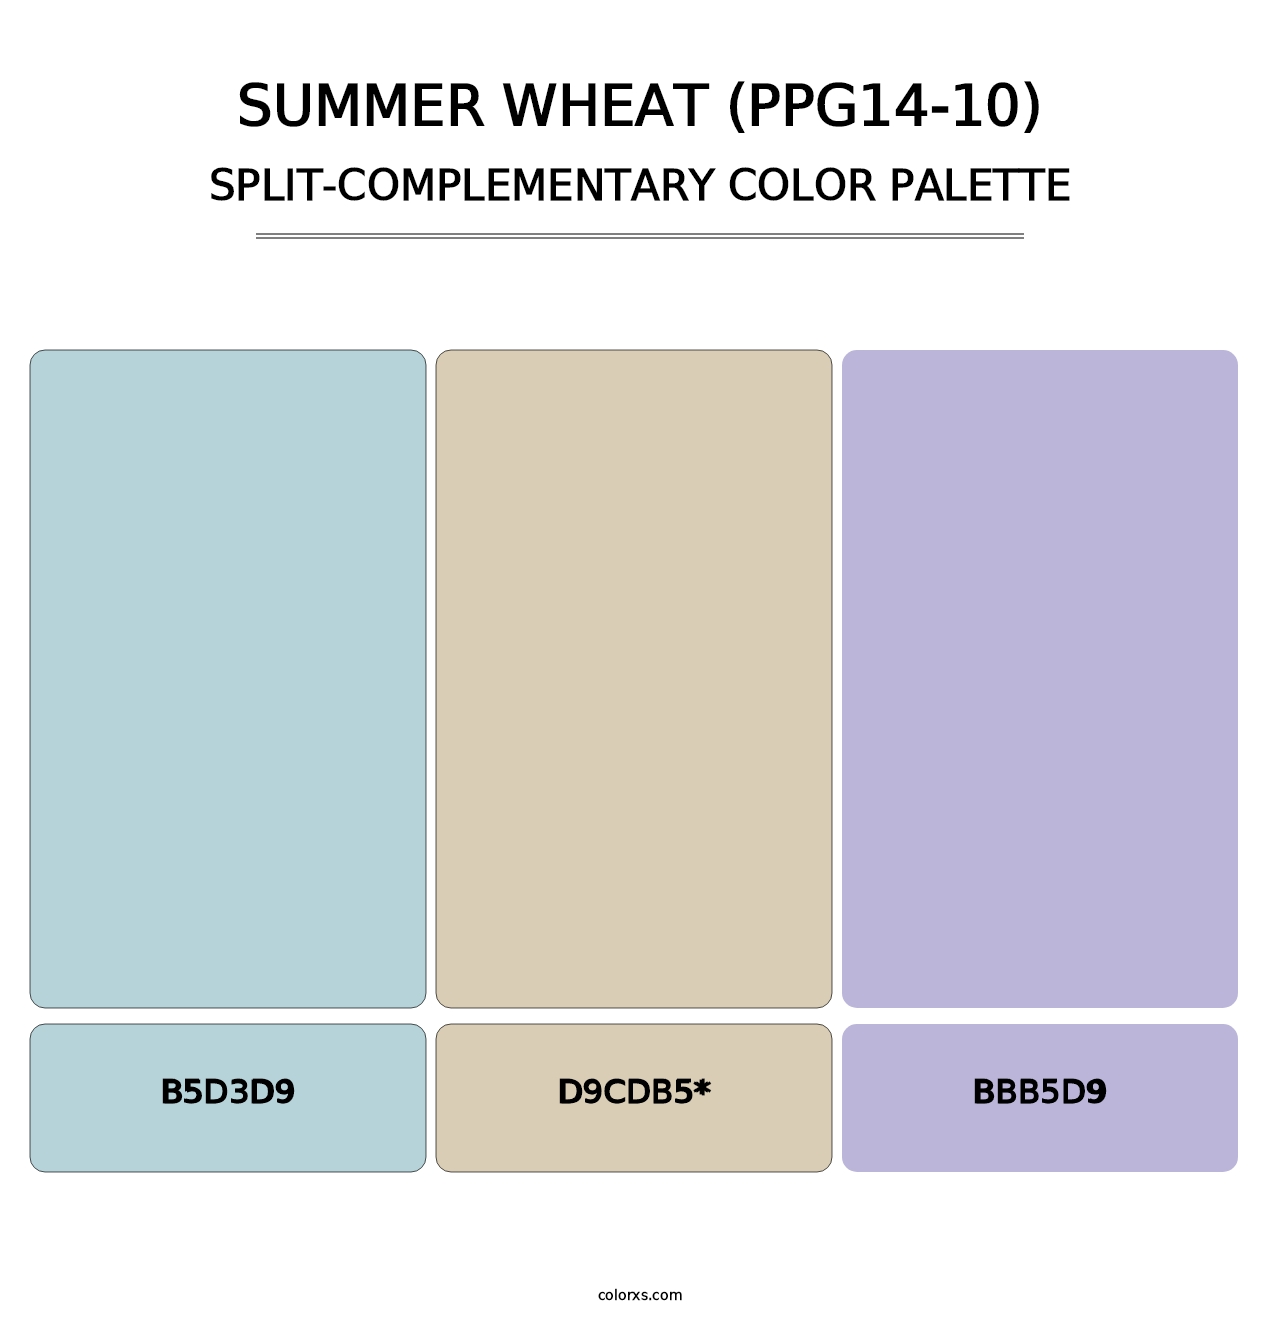 Summer Wheat (PPG14-10) - Split-Complementary Color Palette